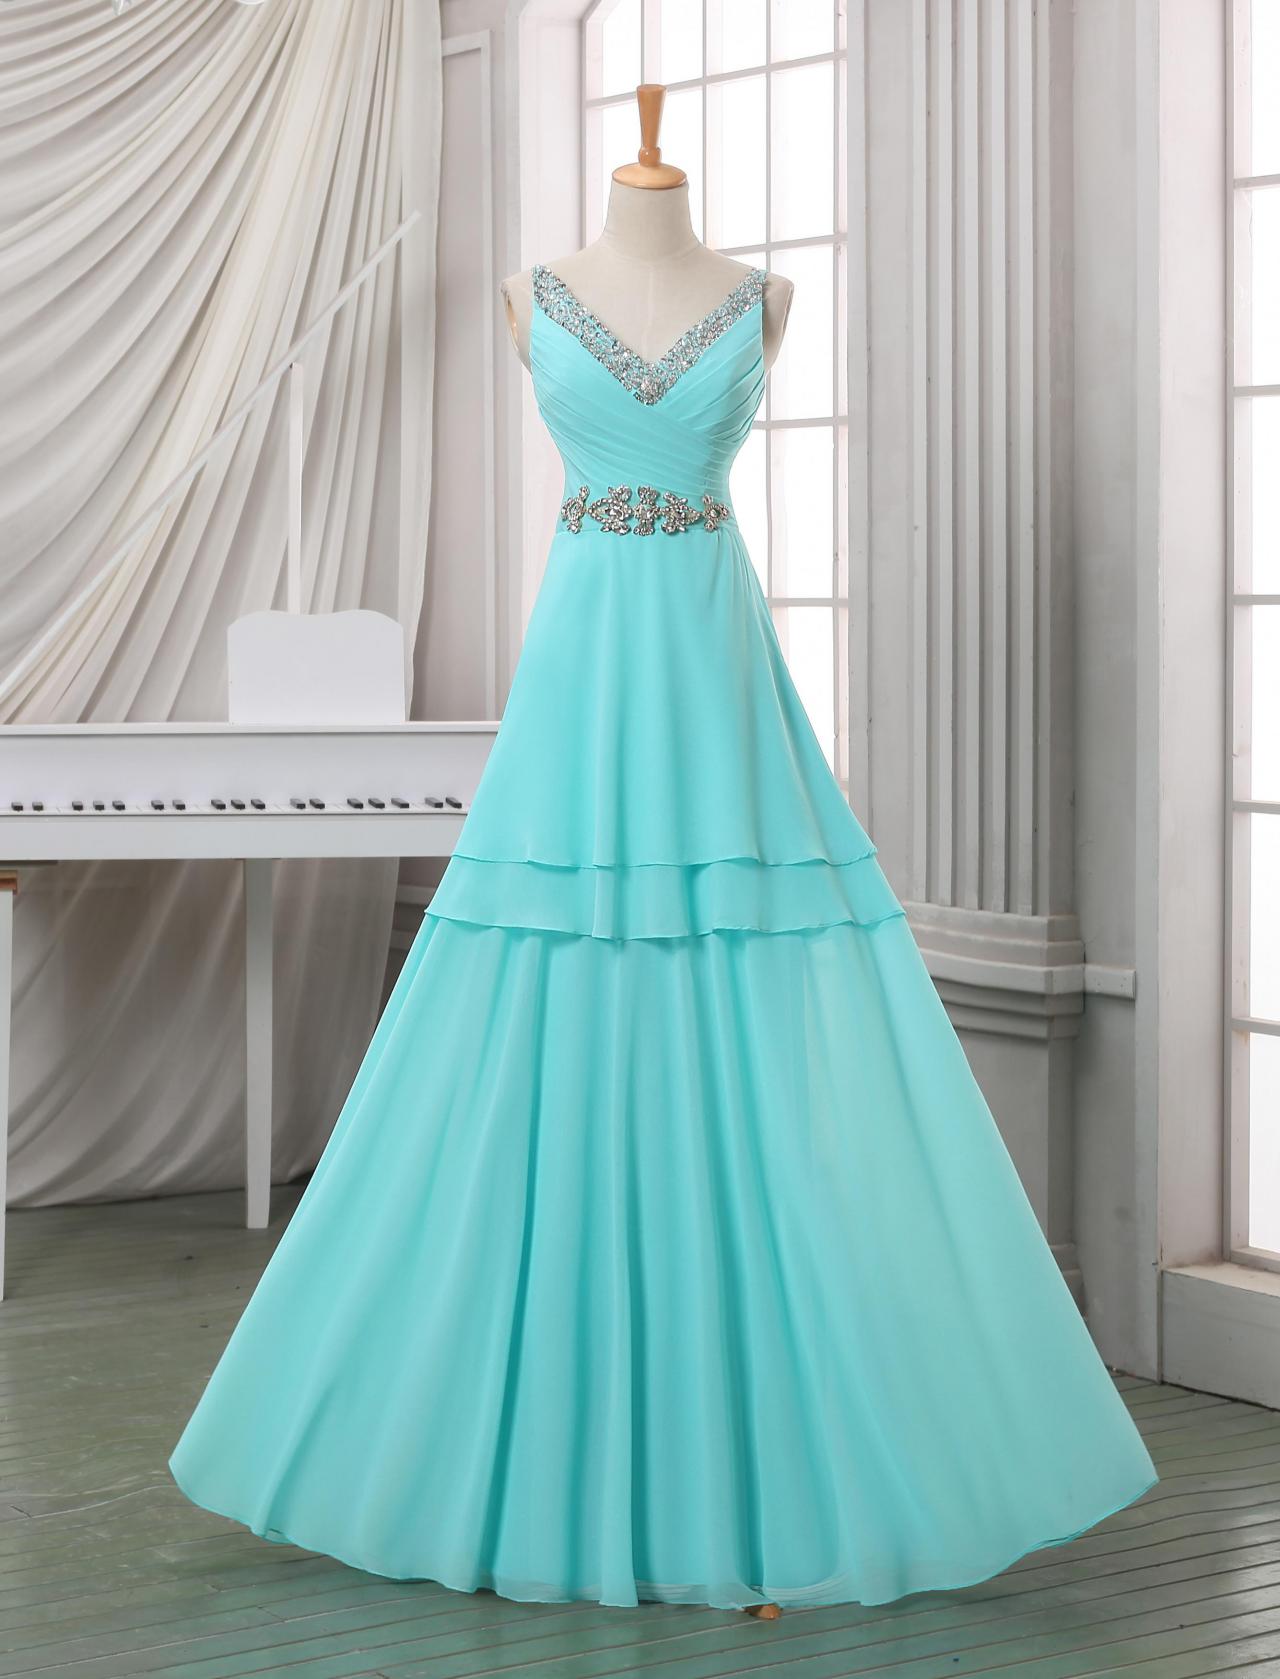 Custom Long Prom Dress With Beadings And Crystals, Deep V Neck Prom Dress,baby Blue Floor Length Prom Dress, Prom Dress.